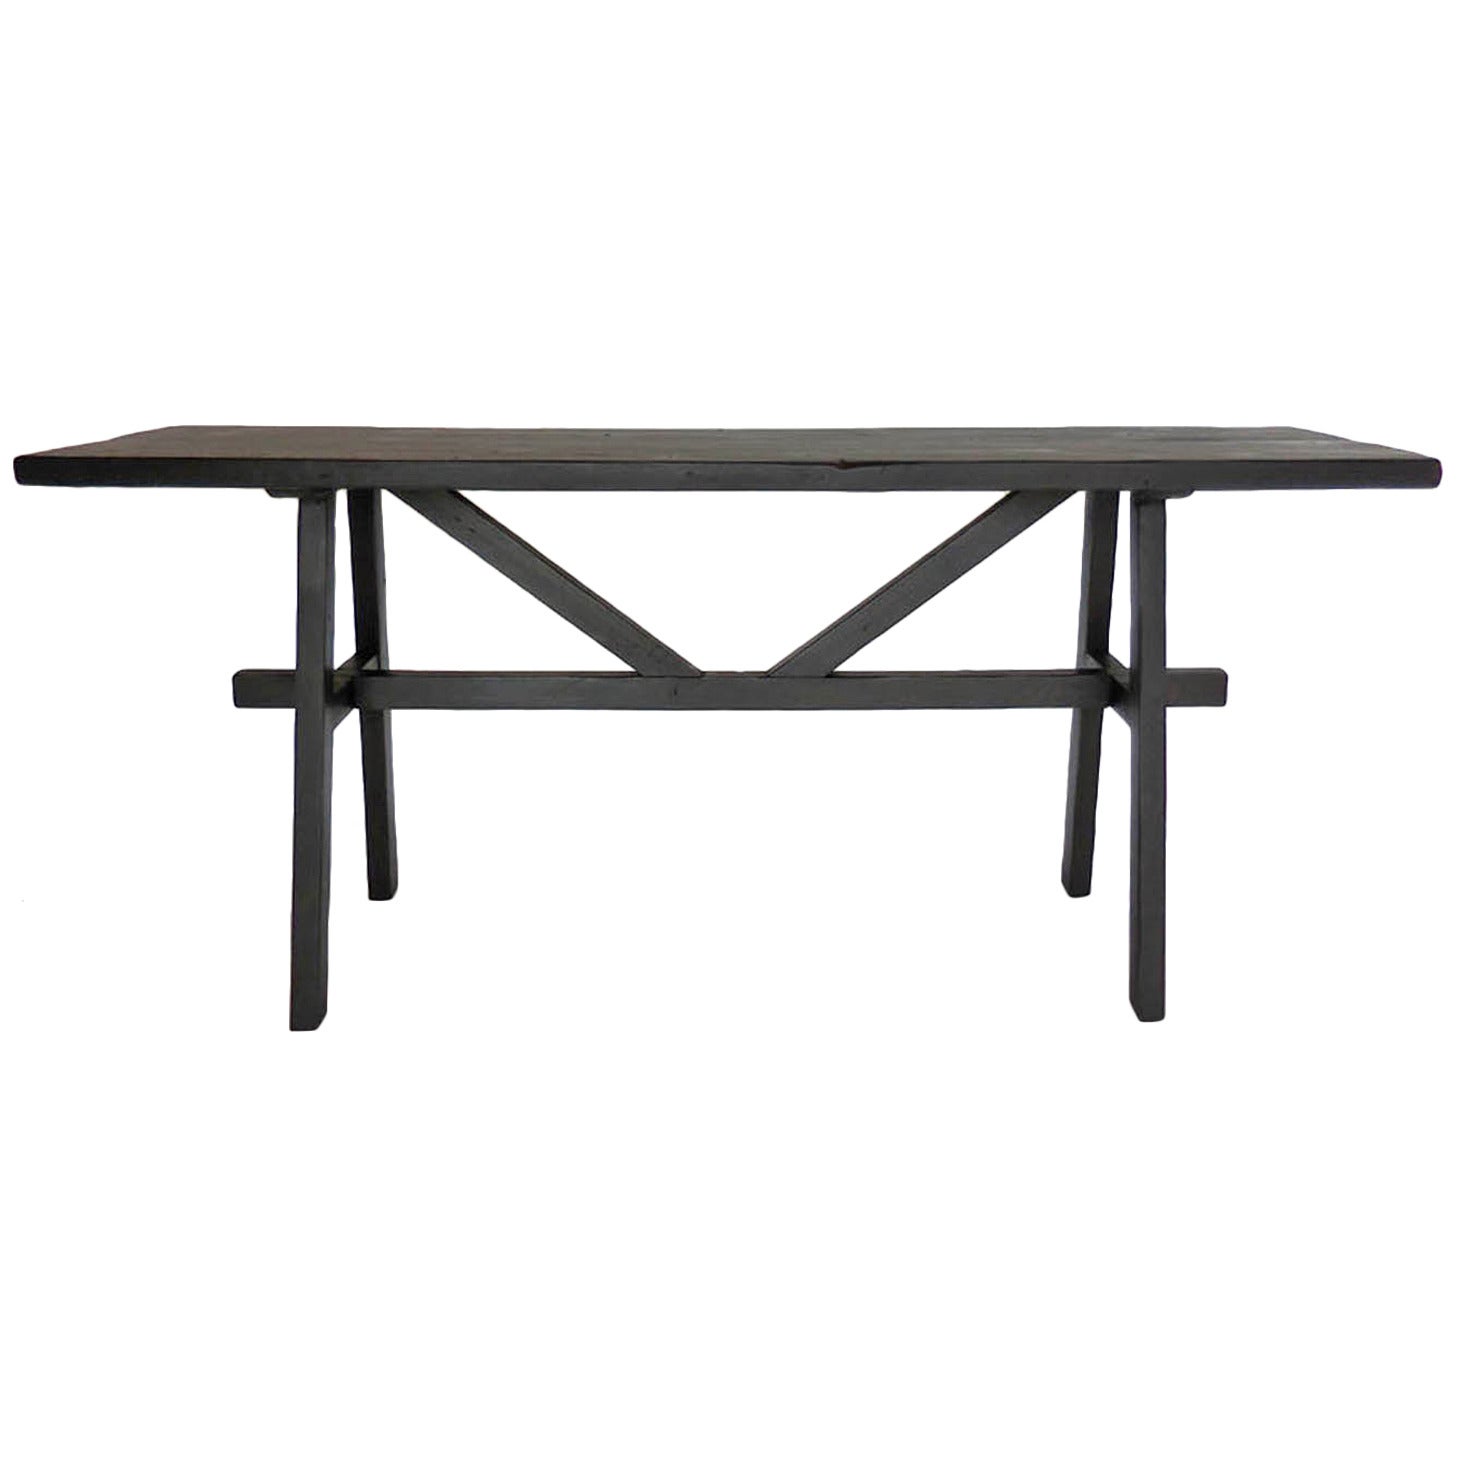 Dos Gallos Custom Reclaimed Wood Console Table in Espresso Finish